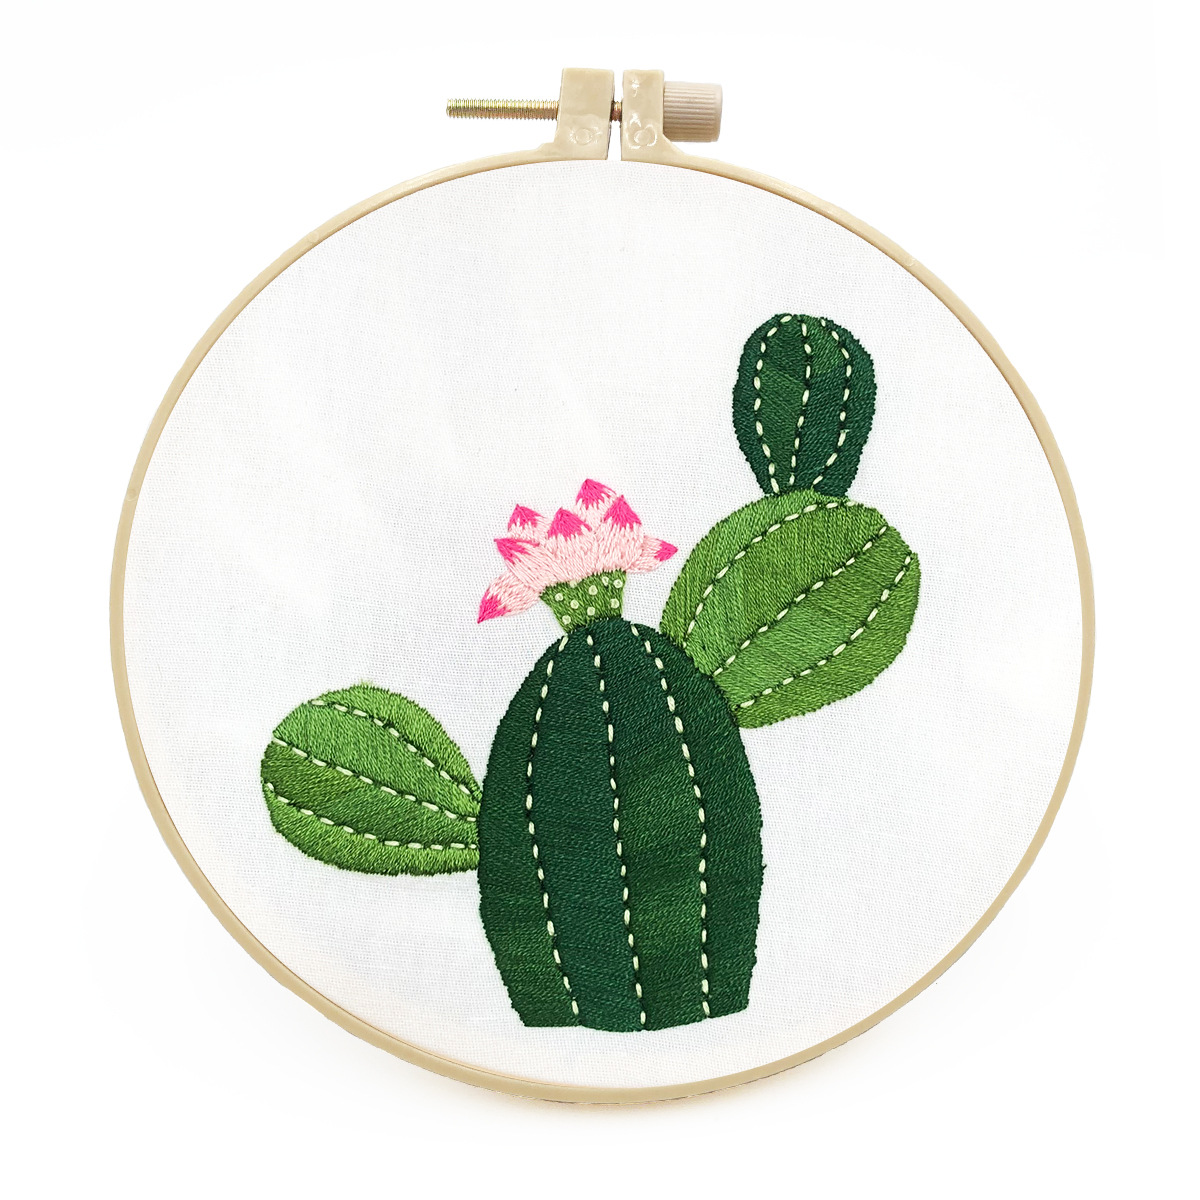 DIY Handmade Embroidery Cross stitch kit - Lovely Pink Cactus Pattern